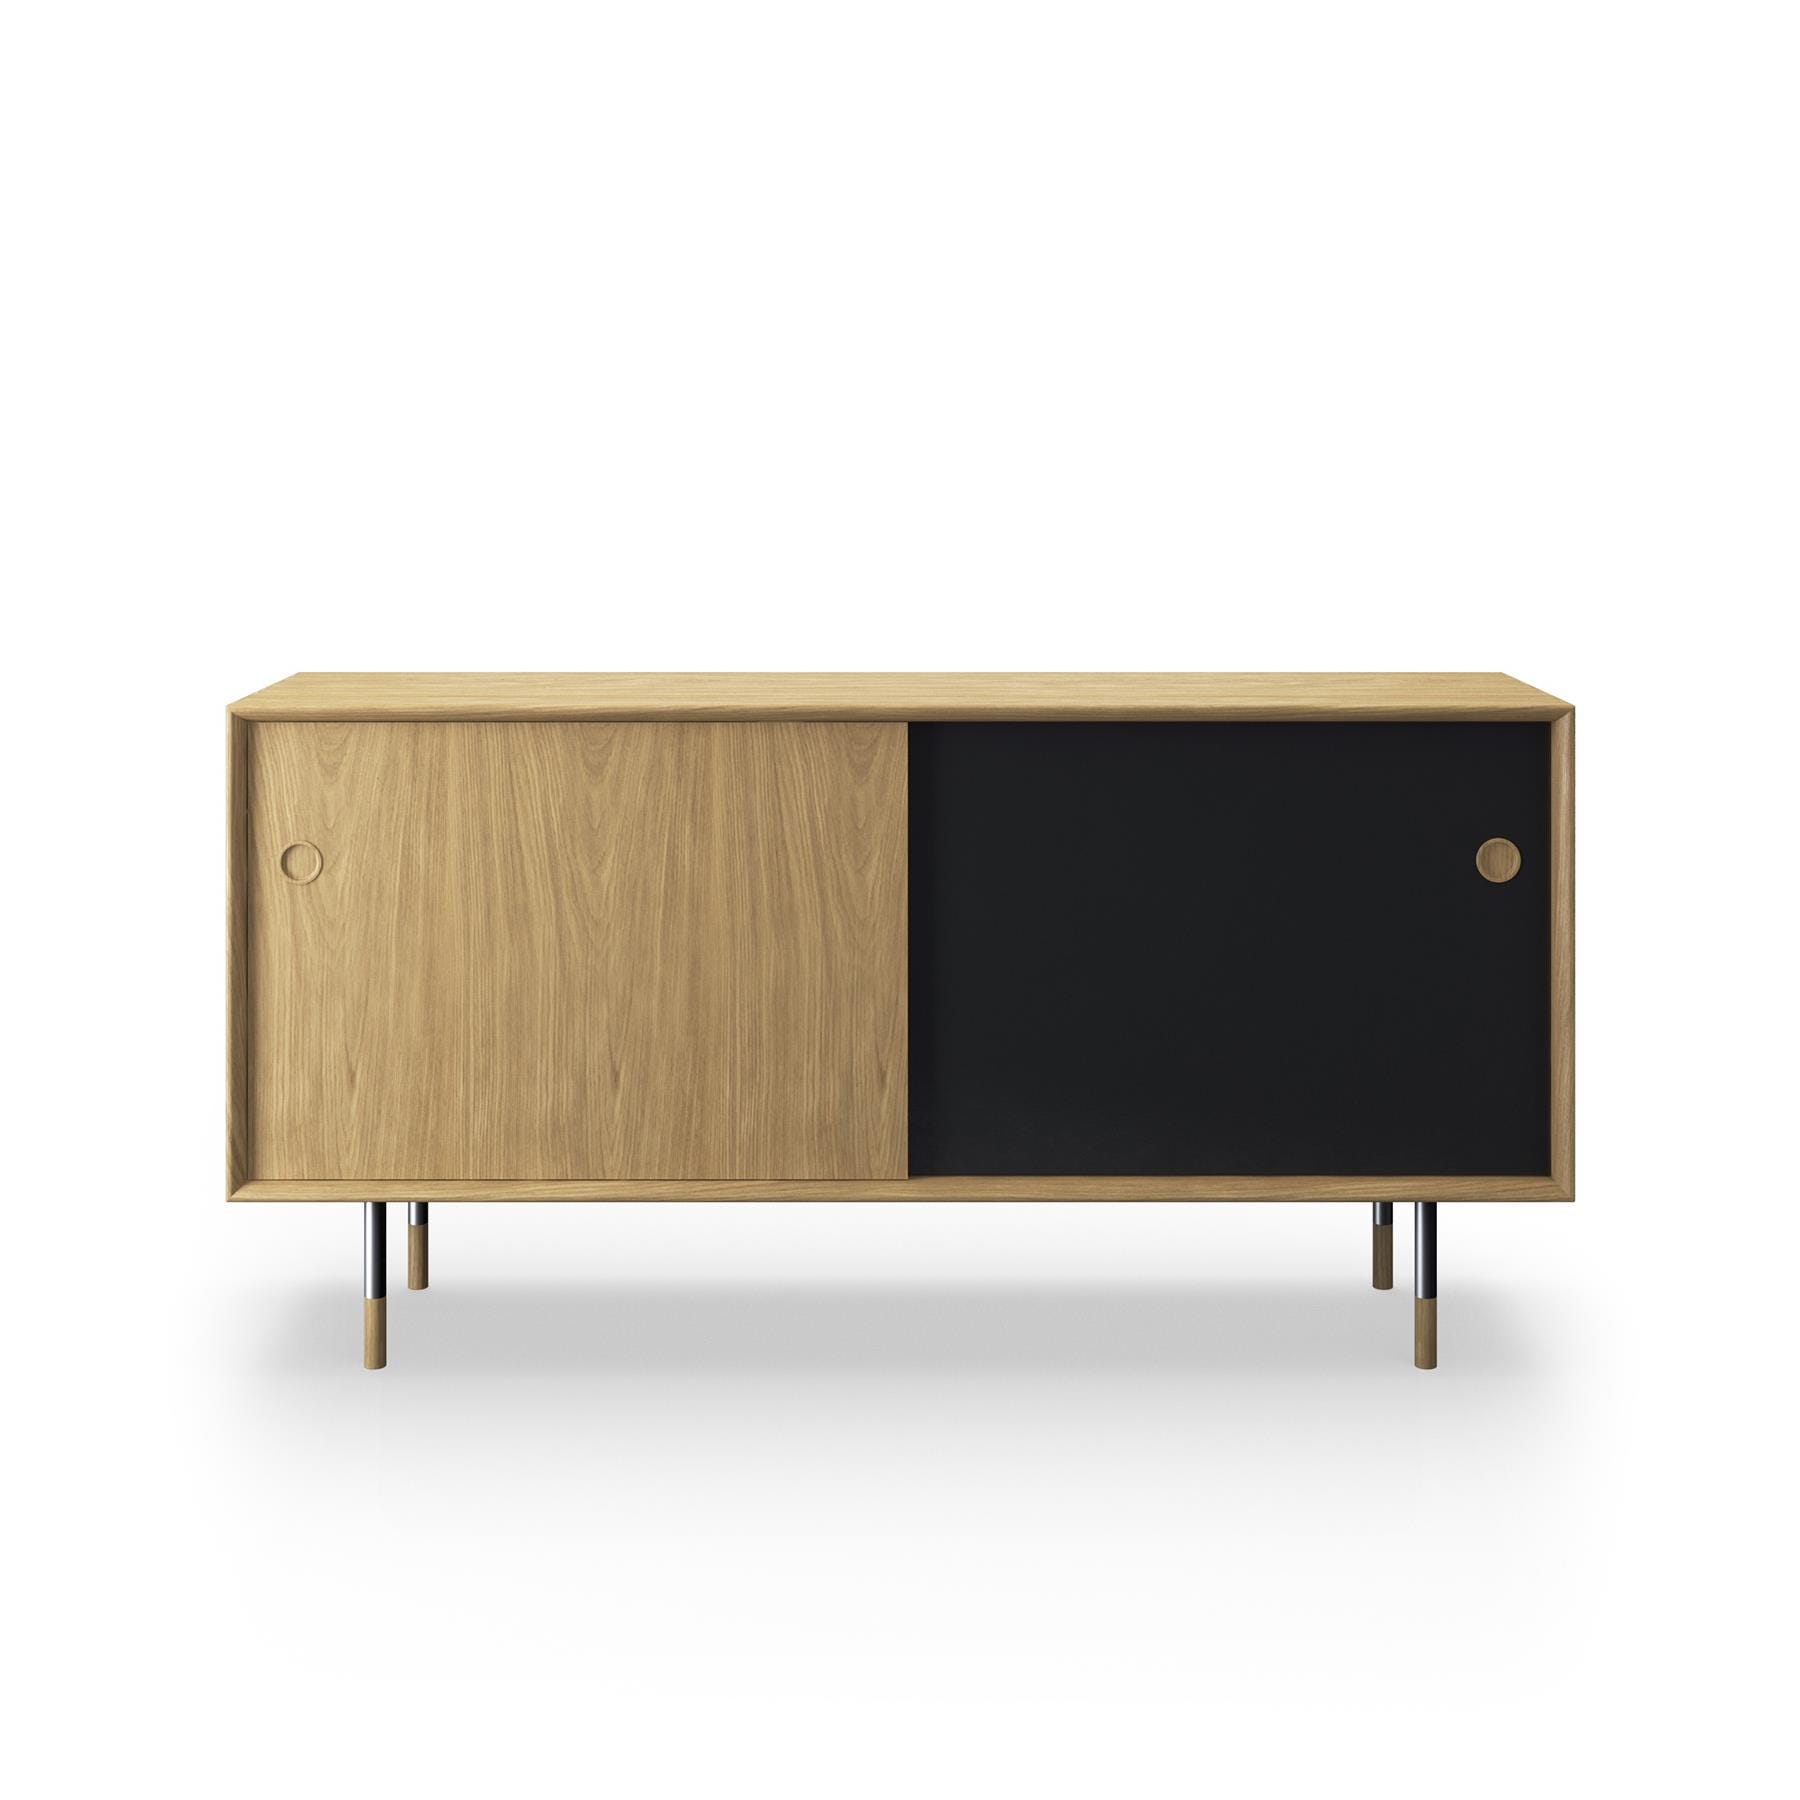 Sibast No 11 Sideboard White Oiled Oak Black And Natural Front Metal Legs Light Wood Designer Furniture From Holloways Of Ludlow